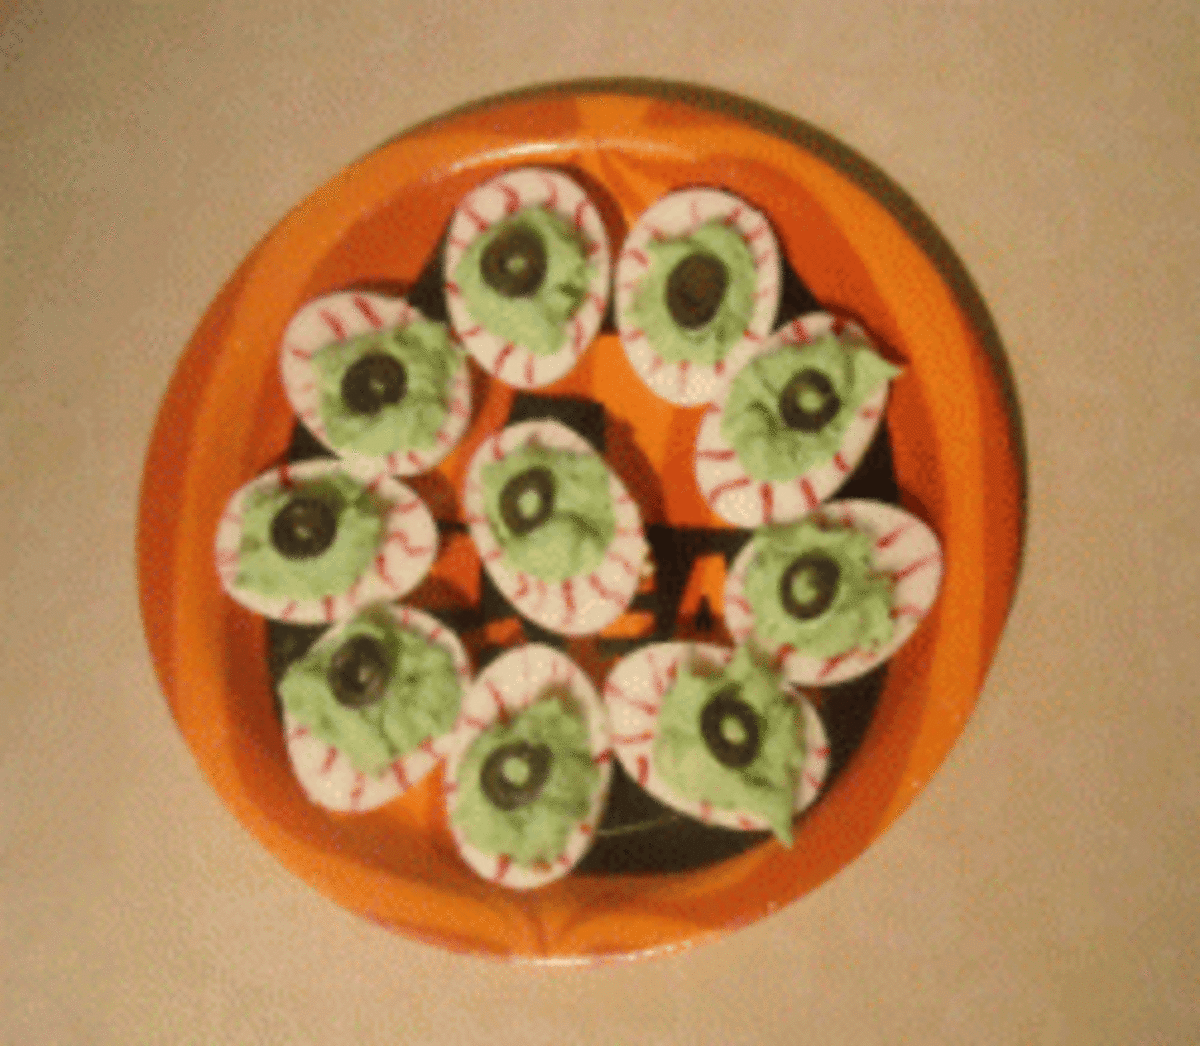 I love Halloween Recipes even when they are for other holidays, like this deviled egg day celebrated on November 2nd.